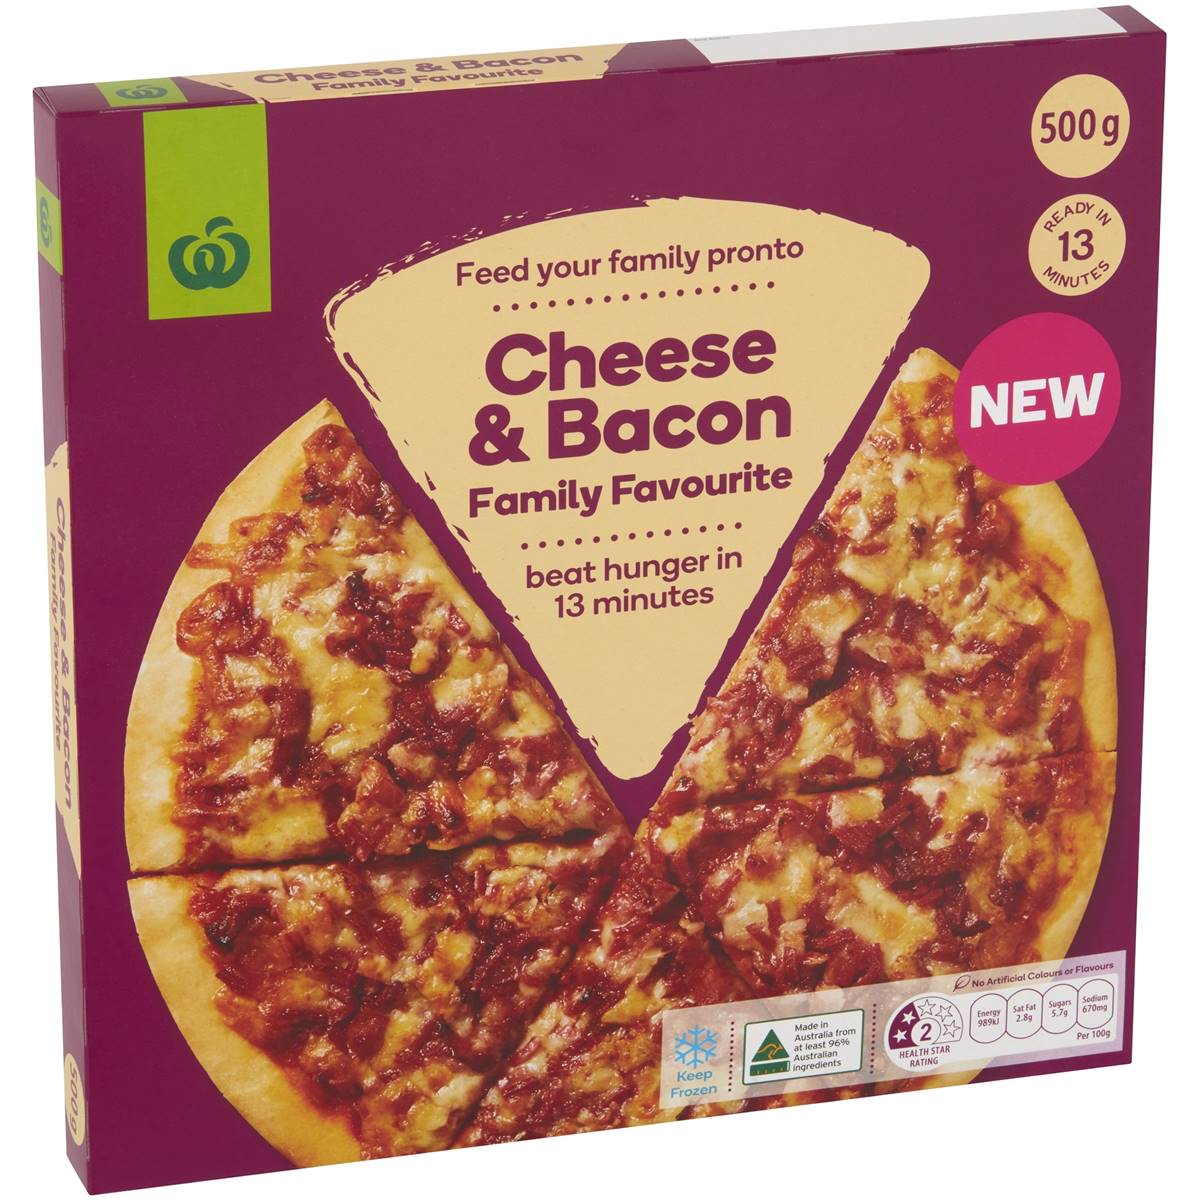 Calories in Woolworths Cheese & Bacon Pizza